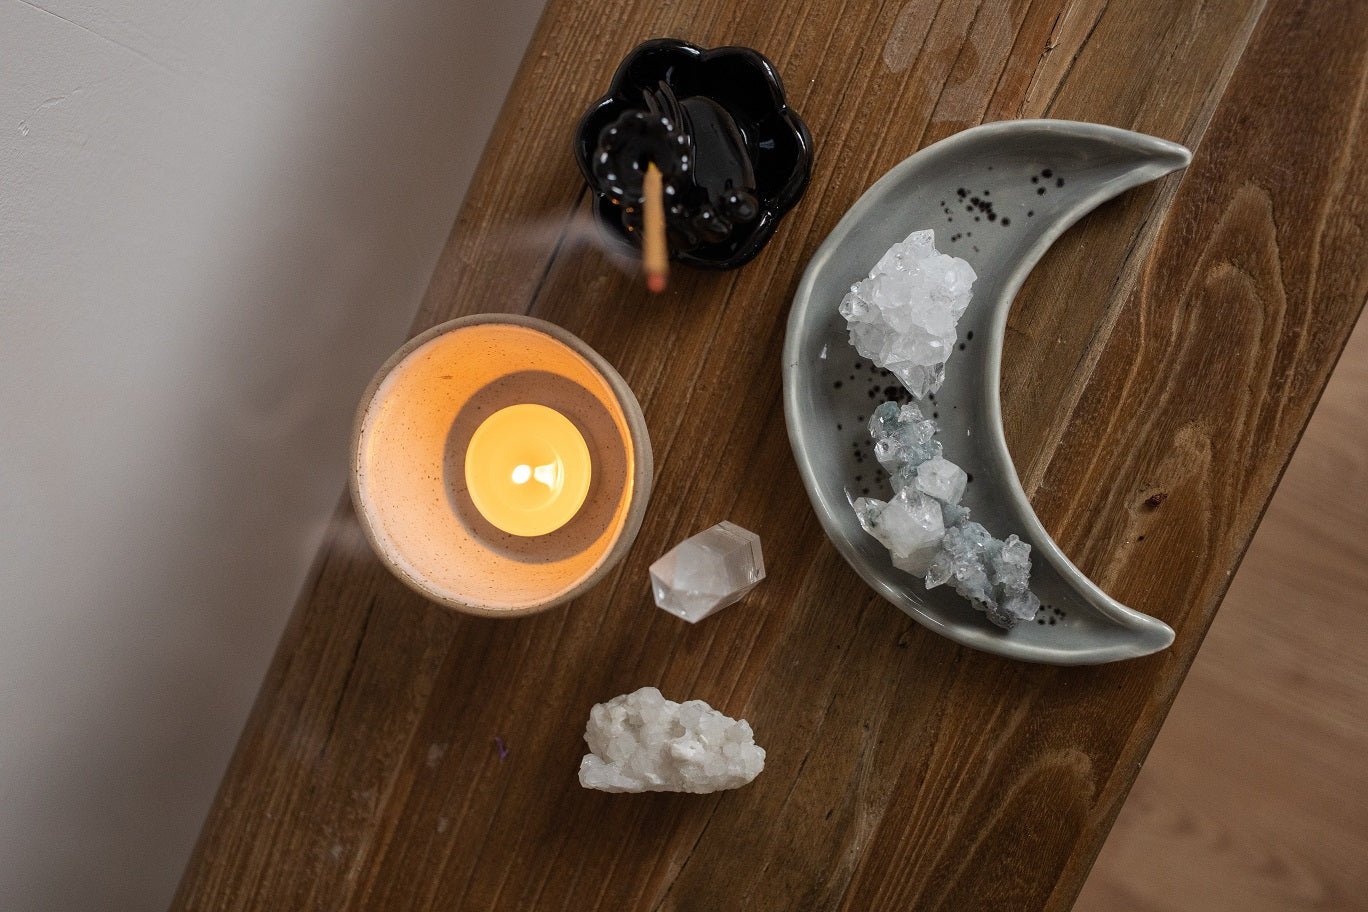 The candle on the shelve with aroma stick and crystals in the bowl